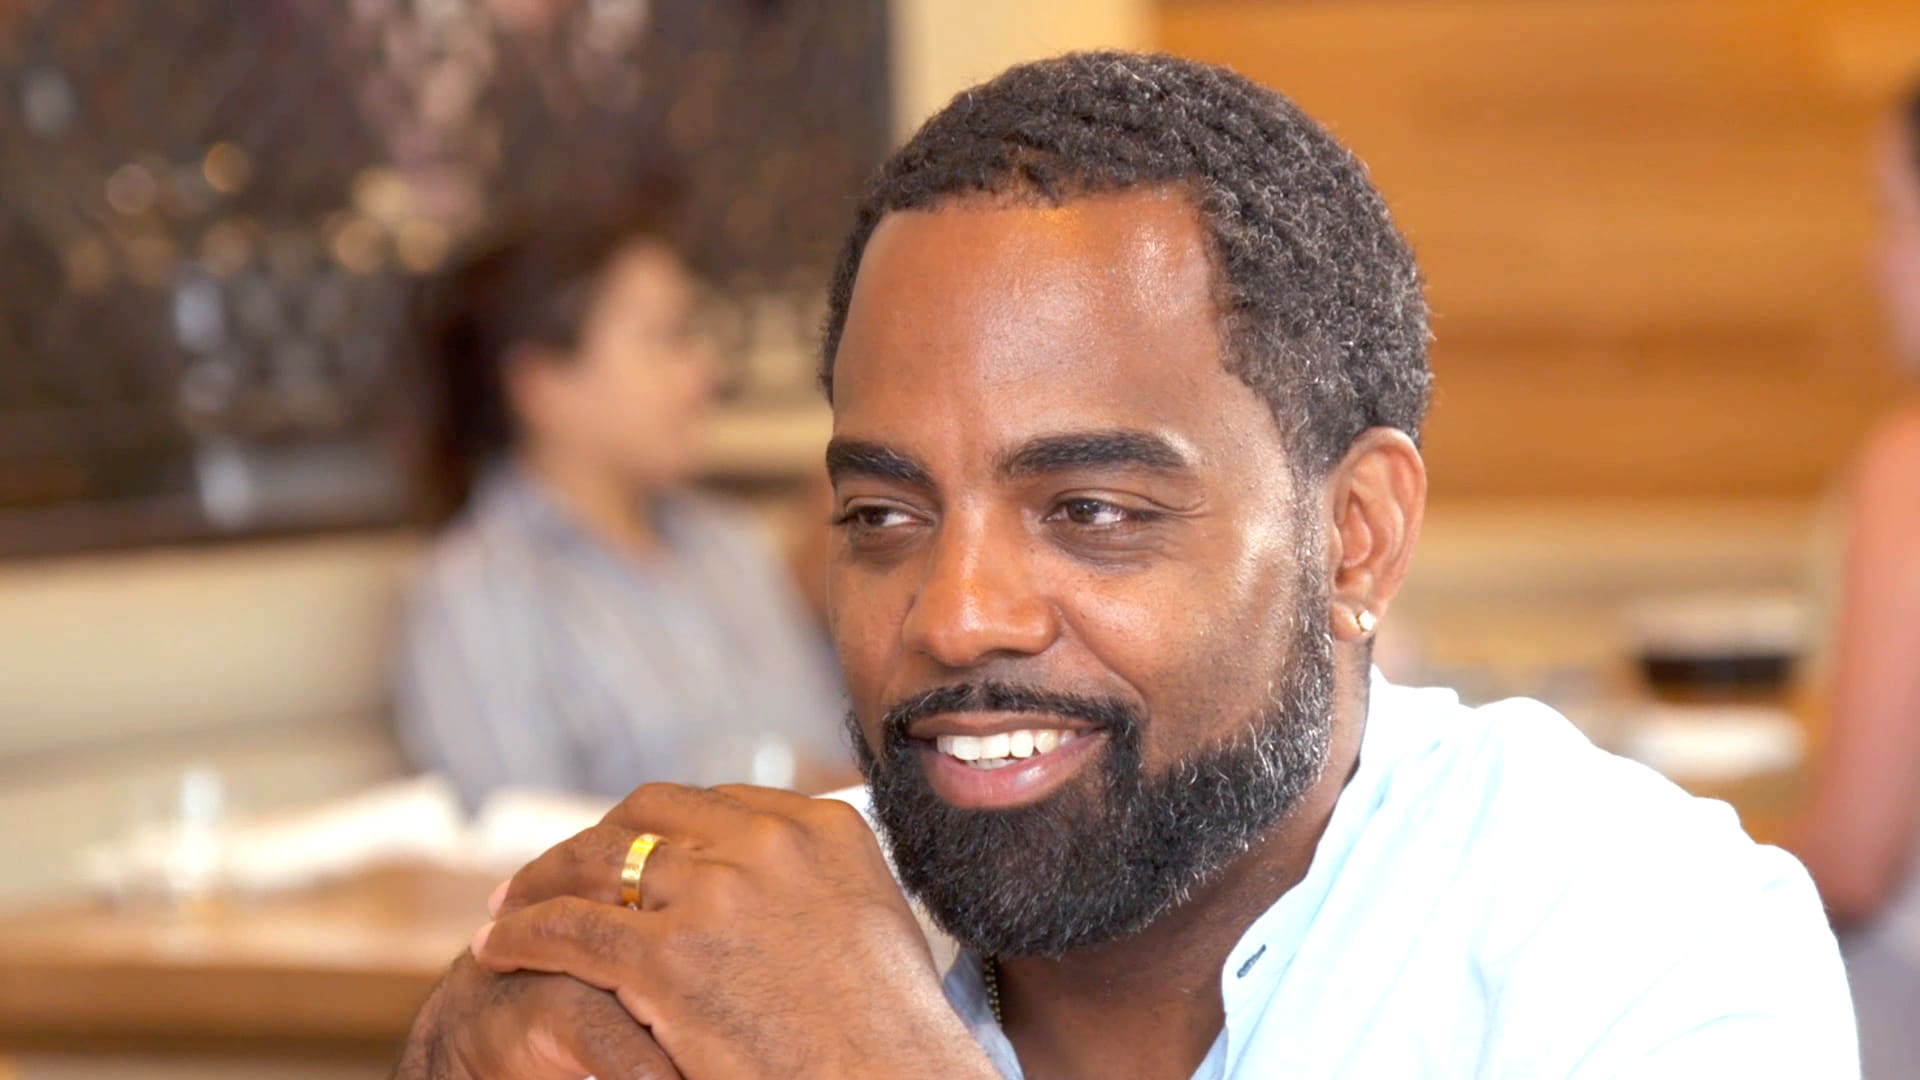 Kandi Burruss' Husband, Todd Tucker Shows A Clip In Which He's Getting Tested For Covid-19 - Fans Criticize The Process